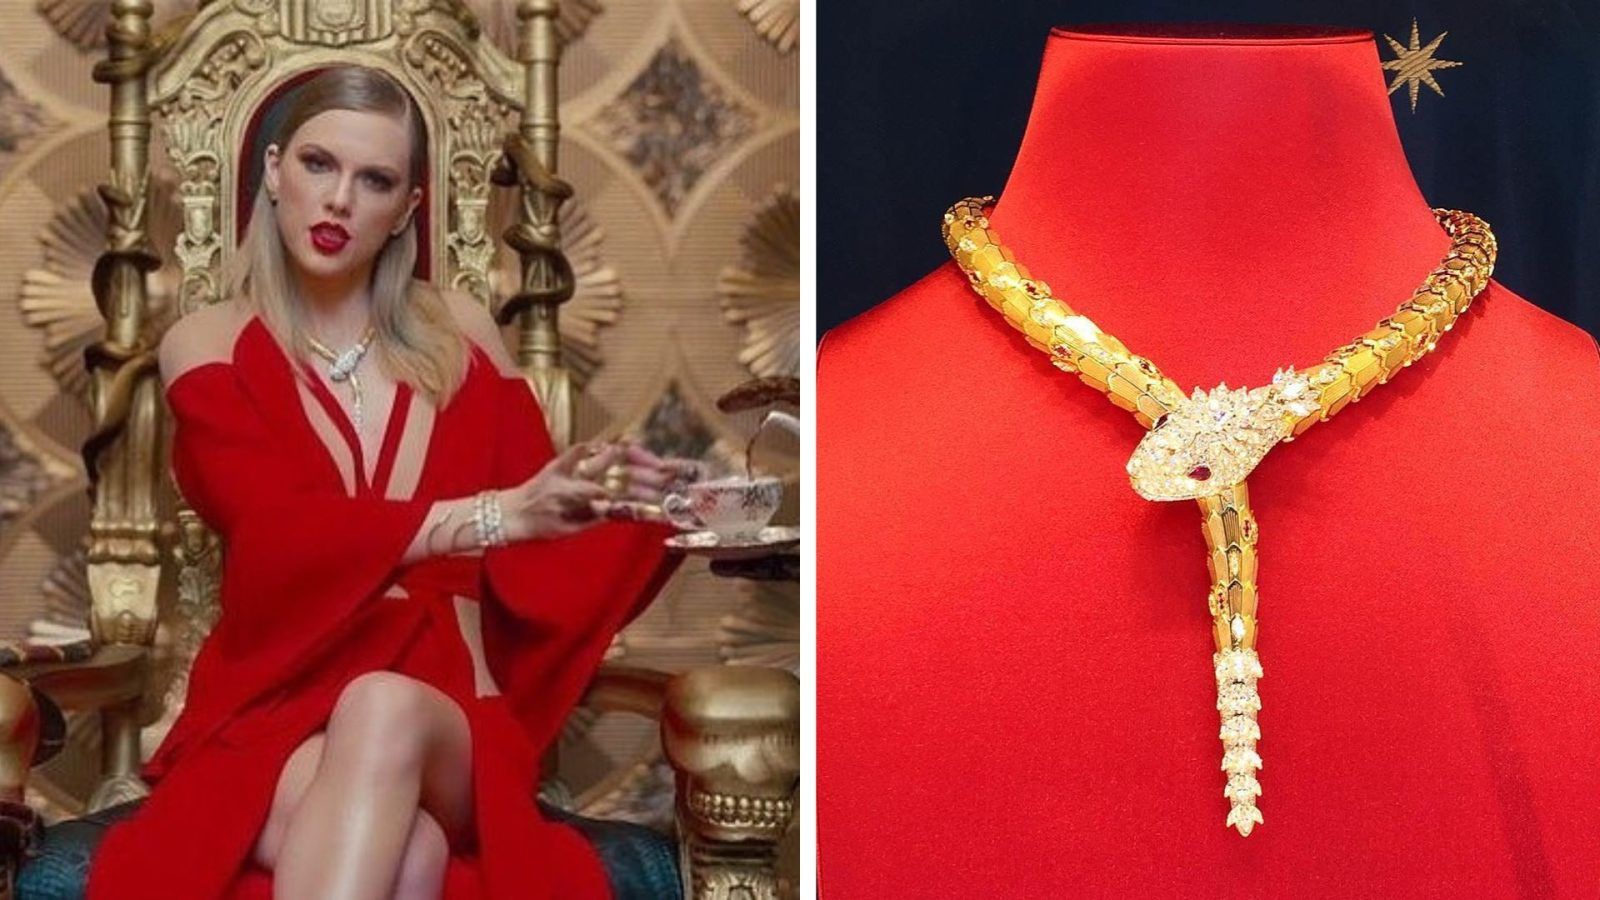 The most expensive jewellery worn by Taylor Swift